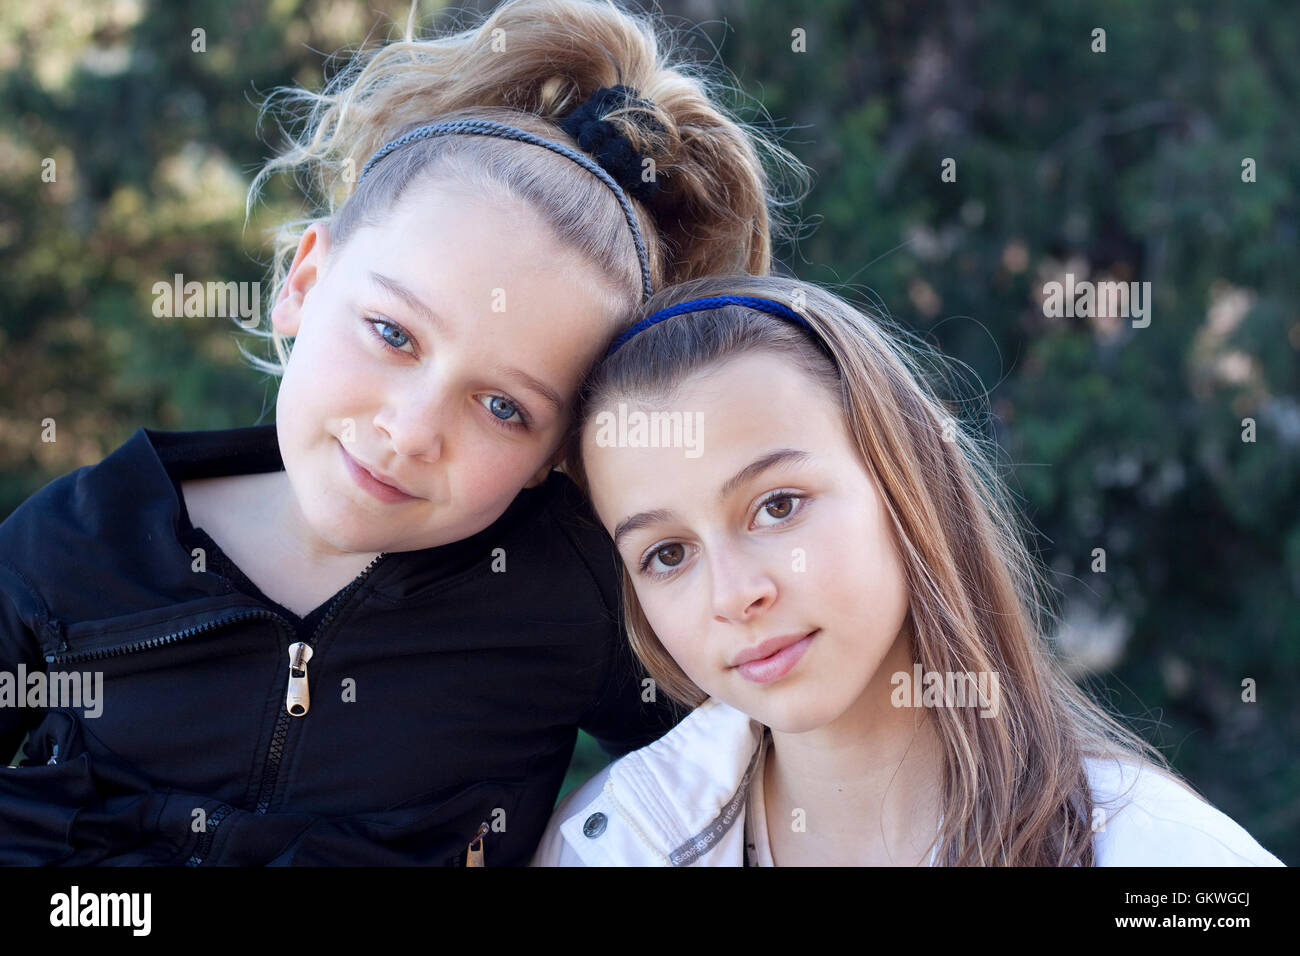 Two young girls best friends Stock Photo